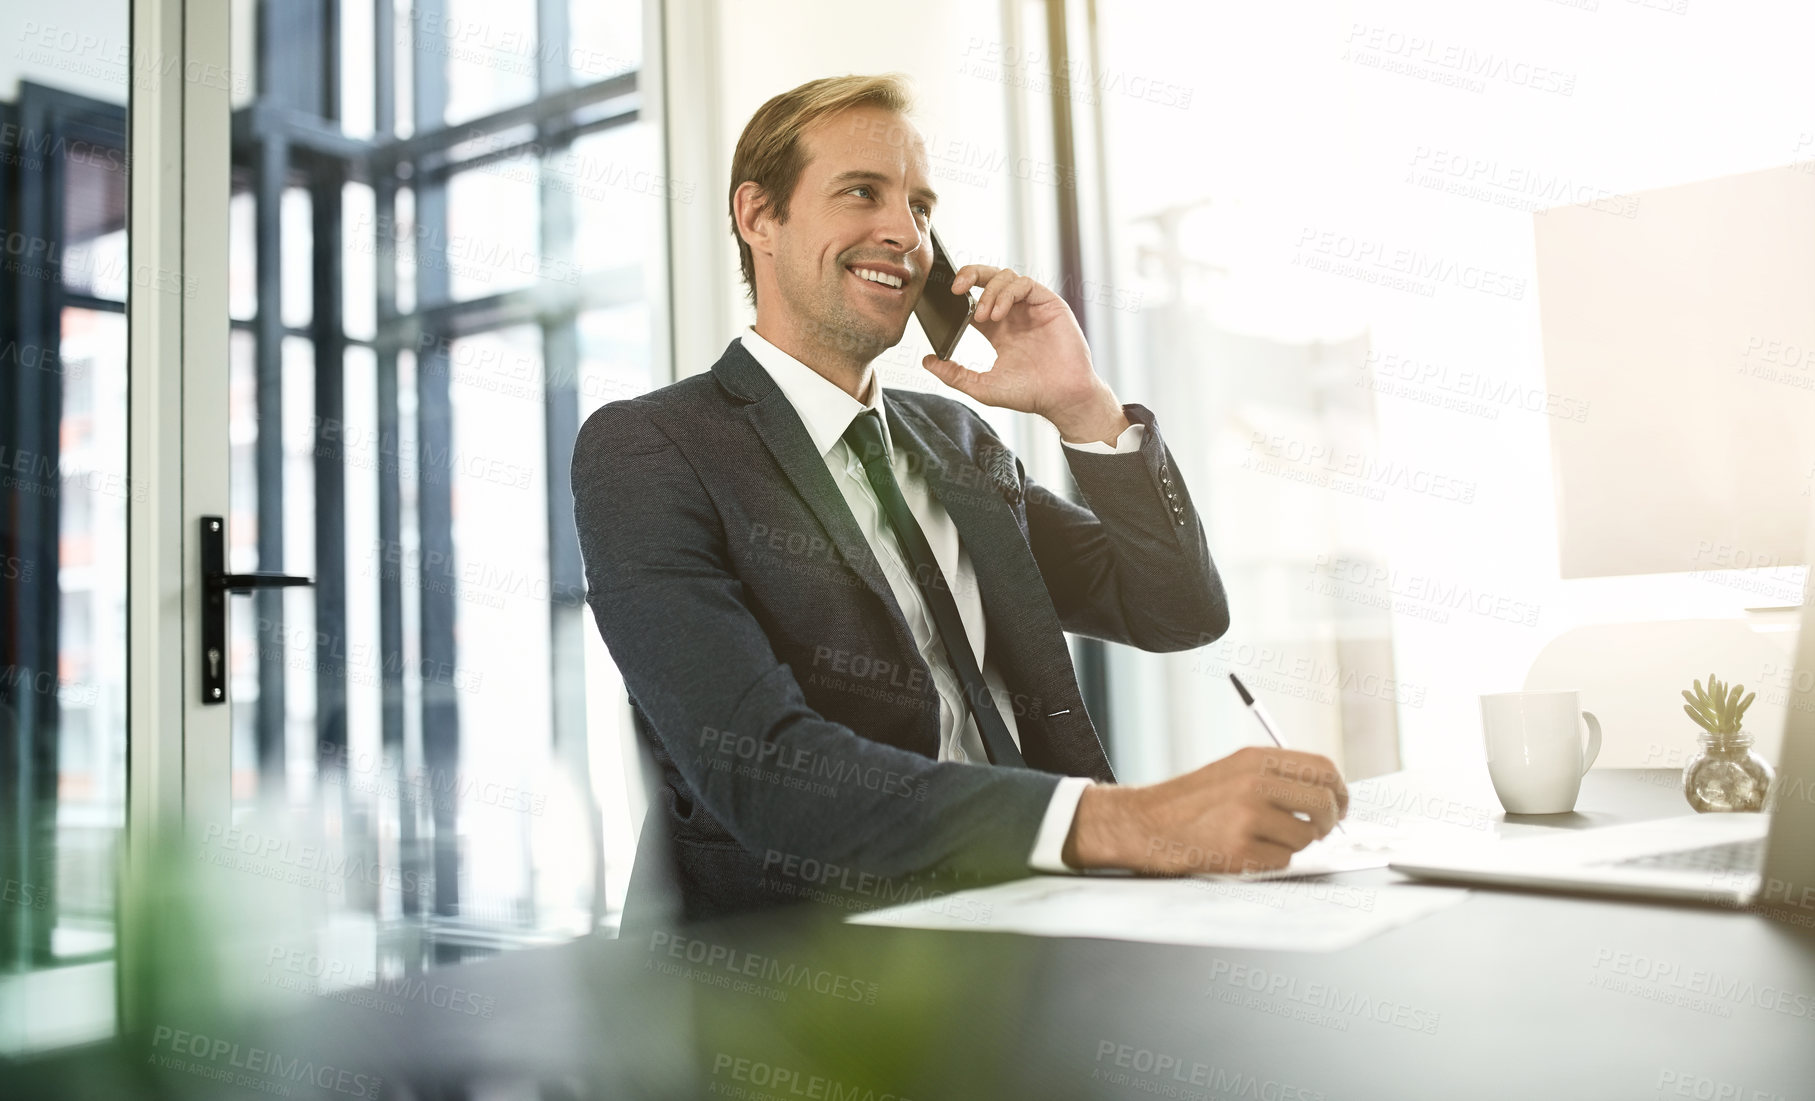 Buy stock photo Shot of a businessman talking on his cellphone in an office